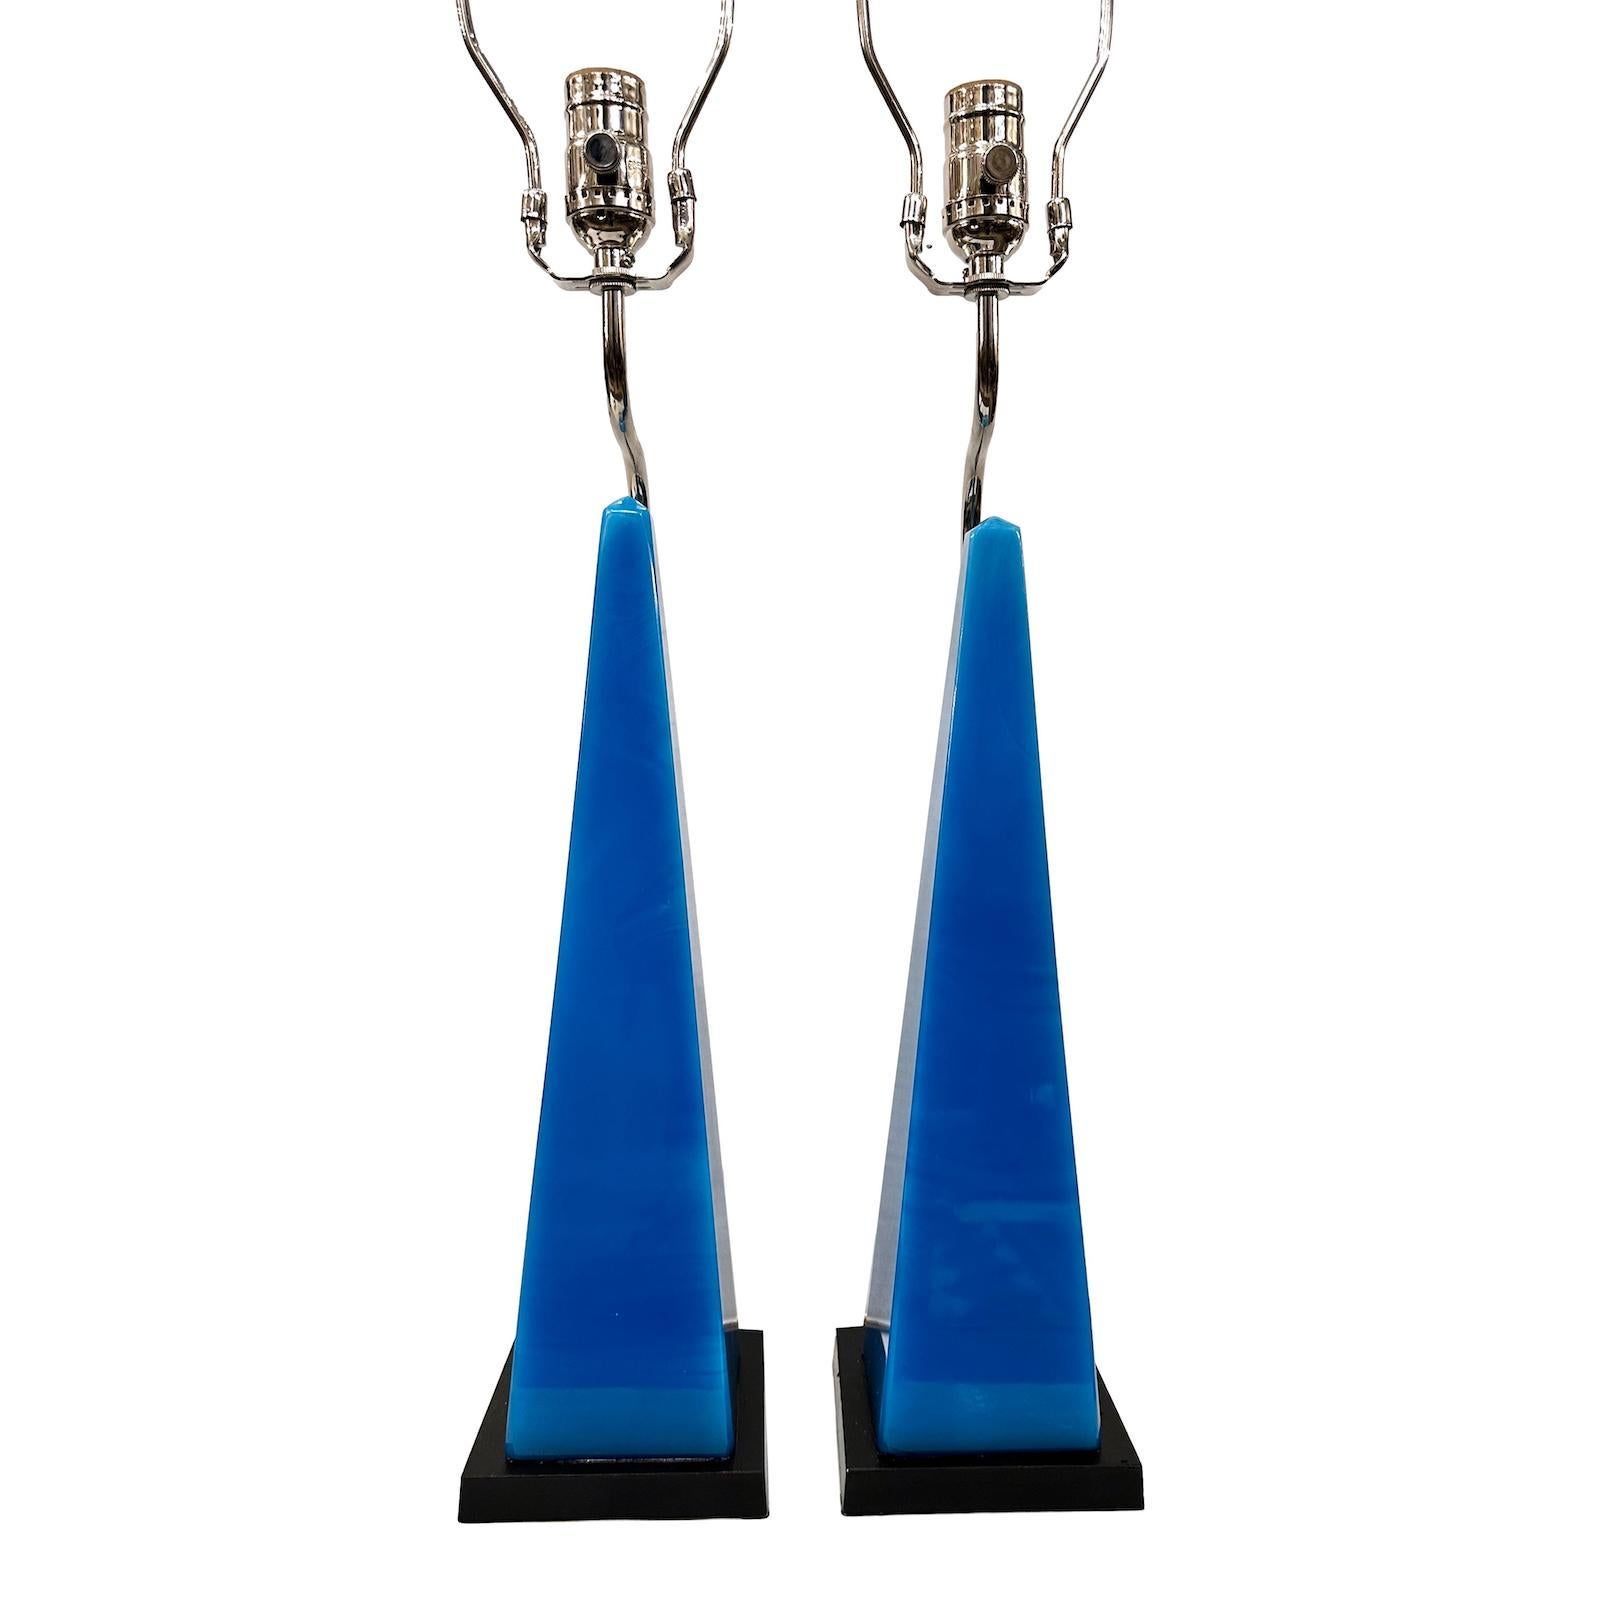 Pair of circa 1950’s French blue glass obelisks mounted as lamps.

Measurements:
Height of body: 18″
Height to shade rest: 30″
Base: 5″ x 5″